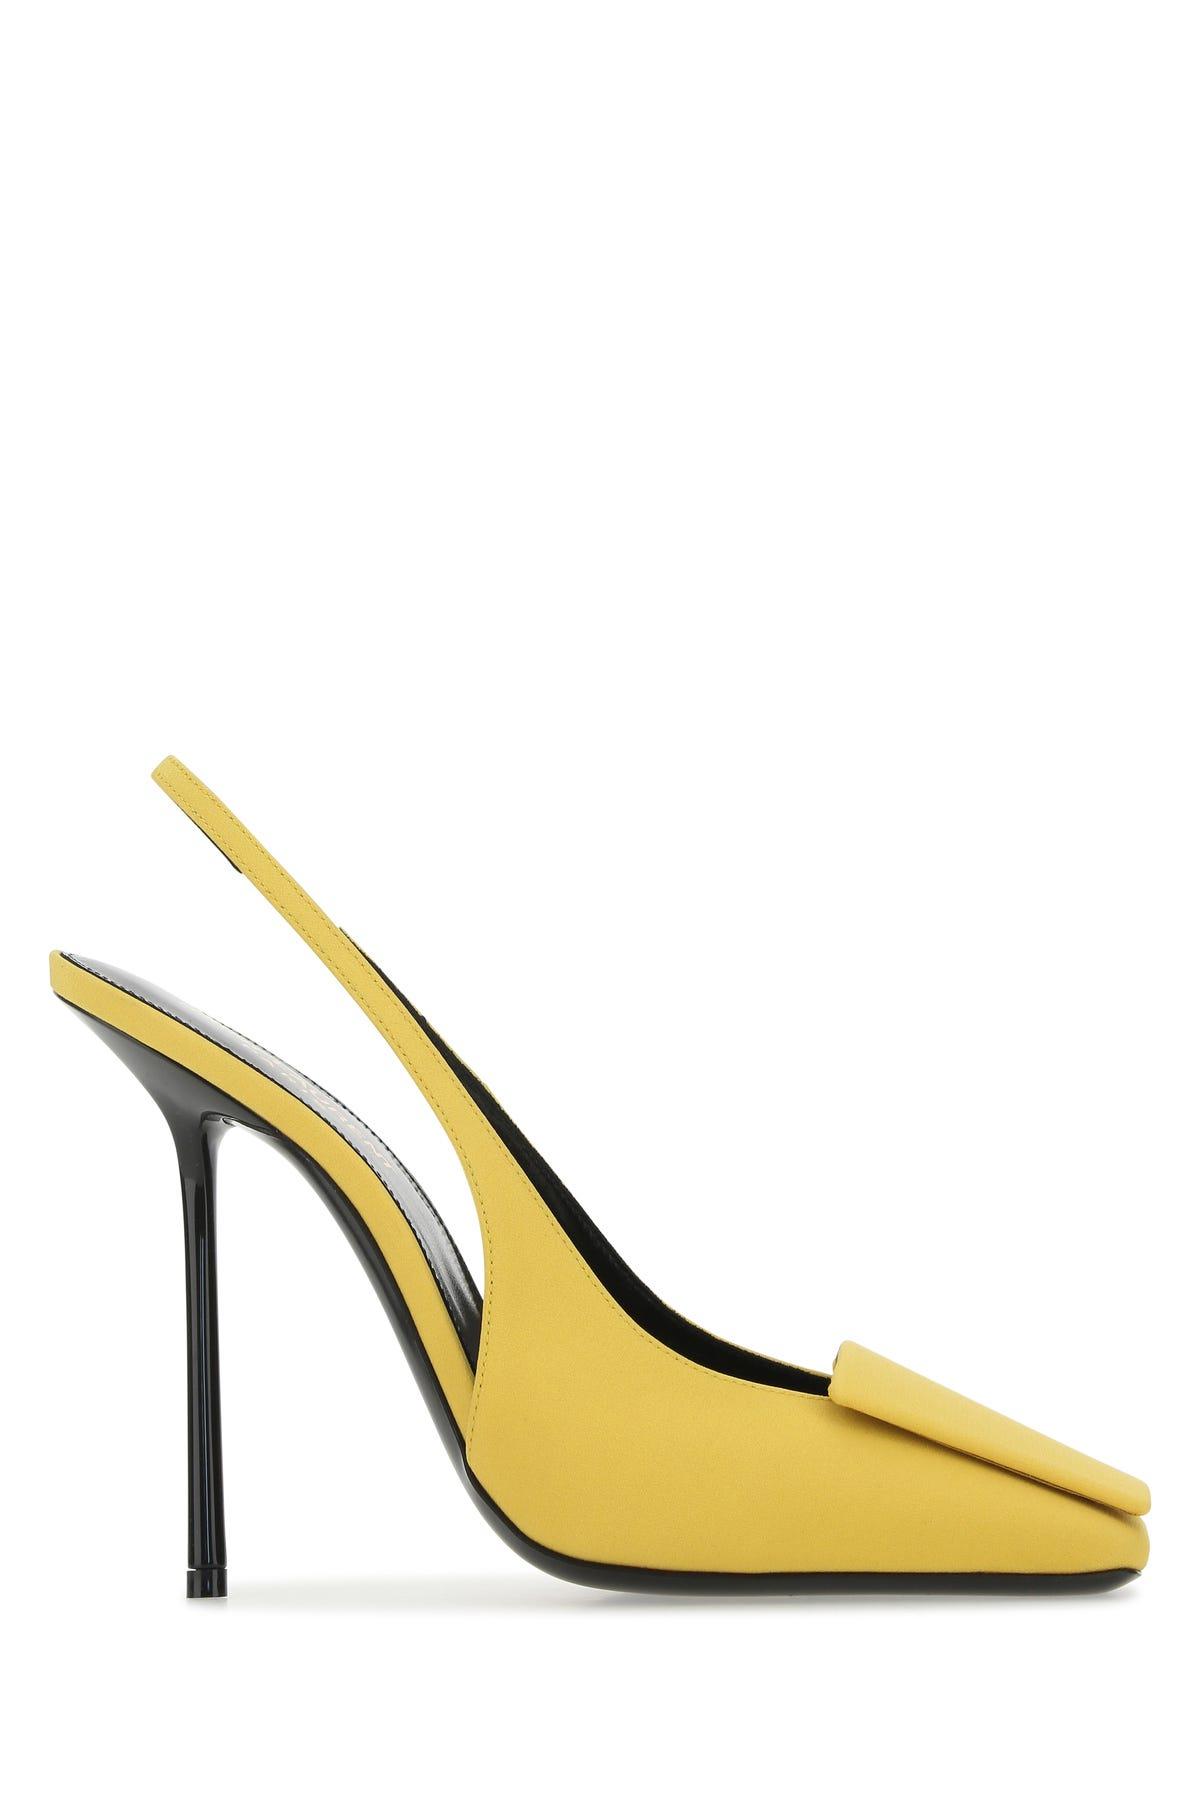 Pollen Yellow Brushed Leather Slingback Pumps | PRADA